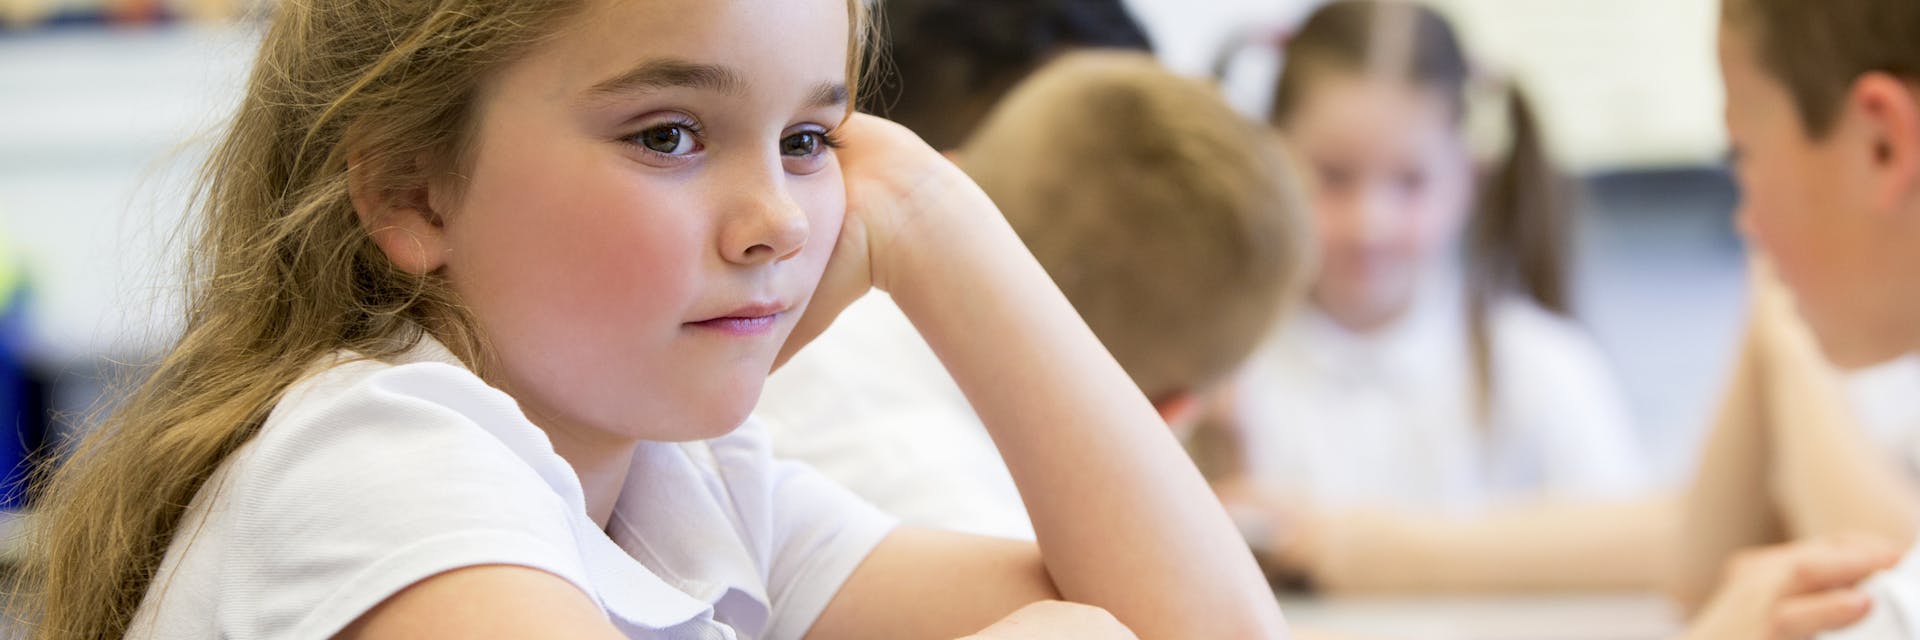 In-School Suspension: 6 Key Elements You Need To Consider